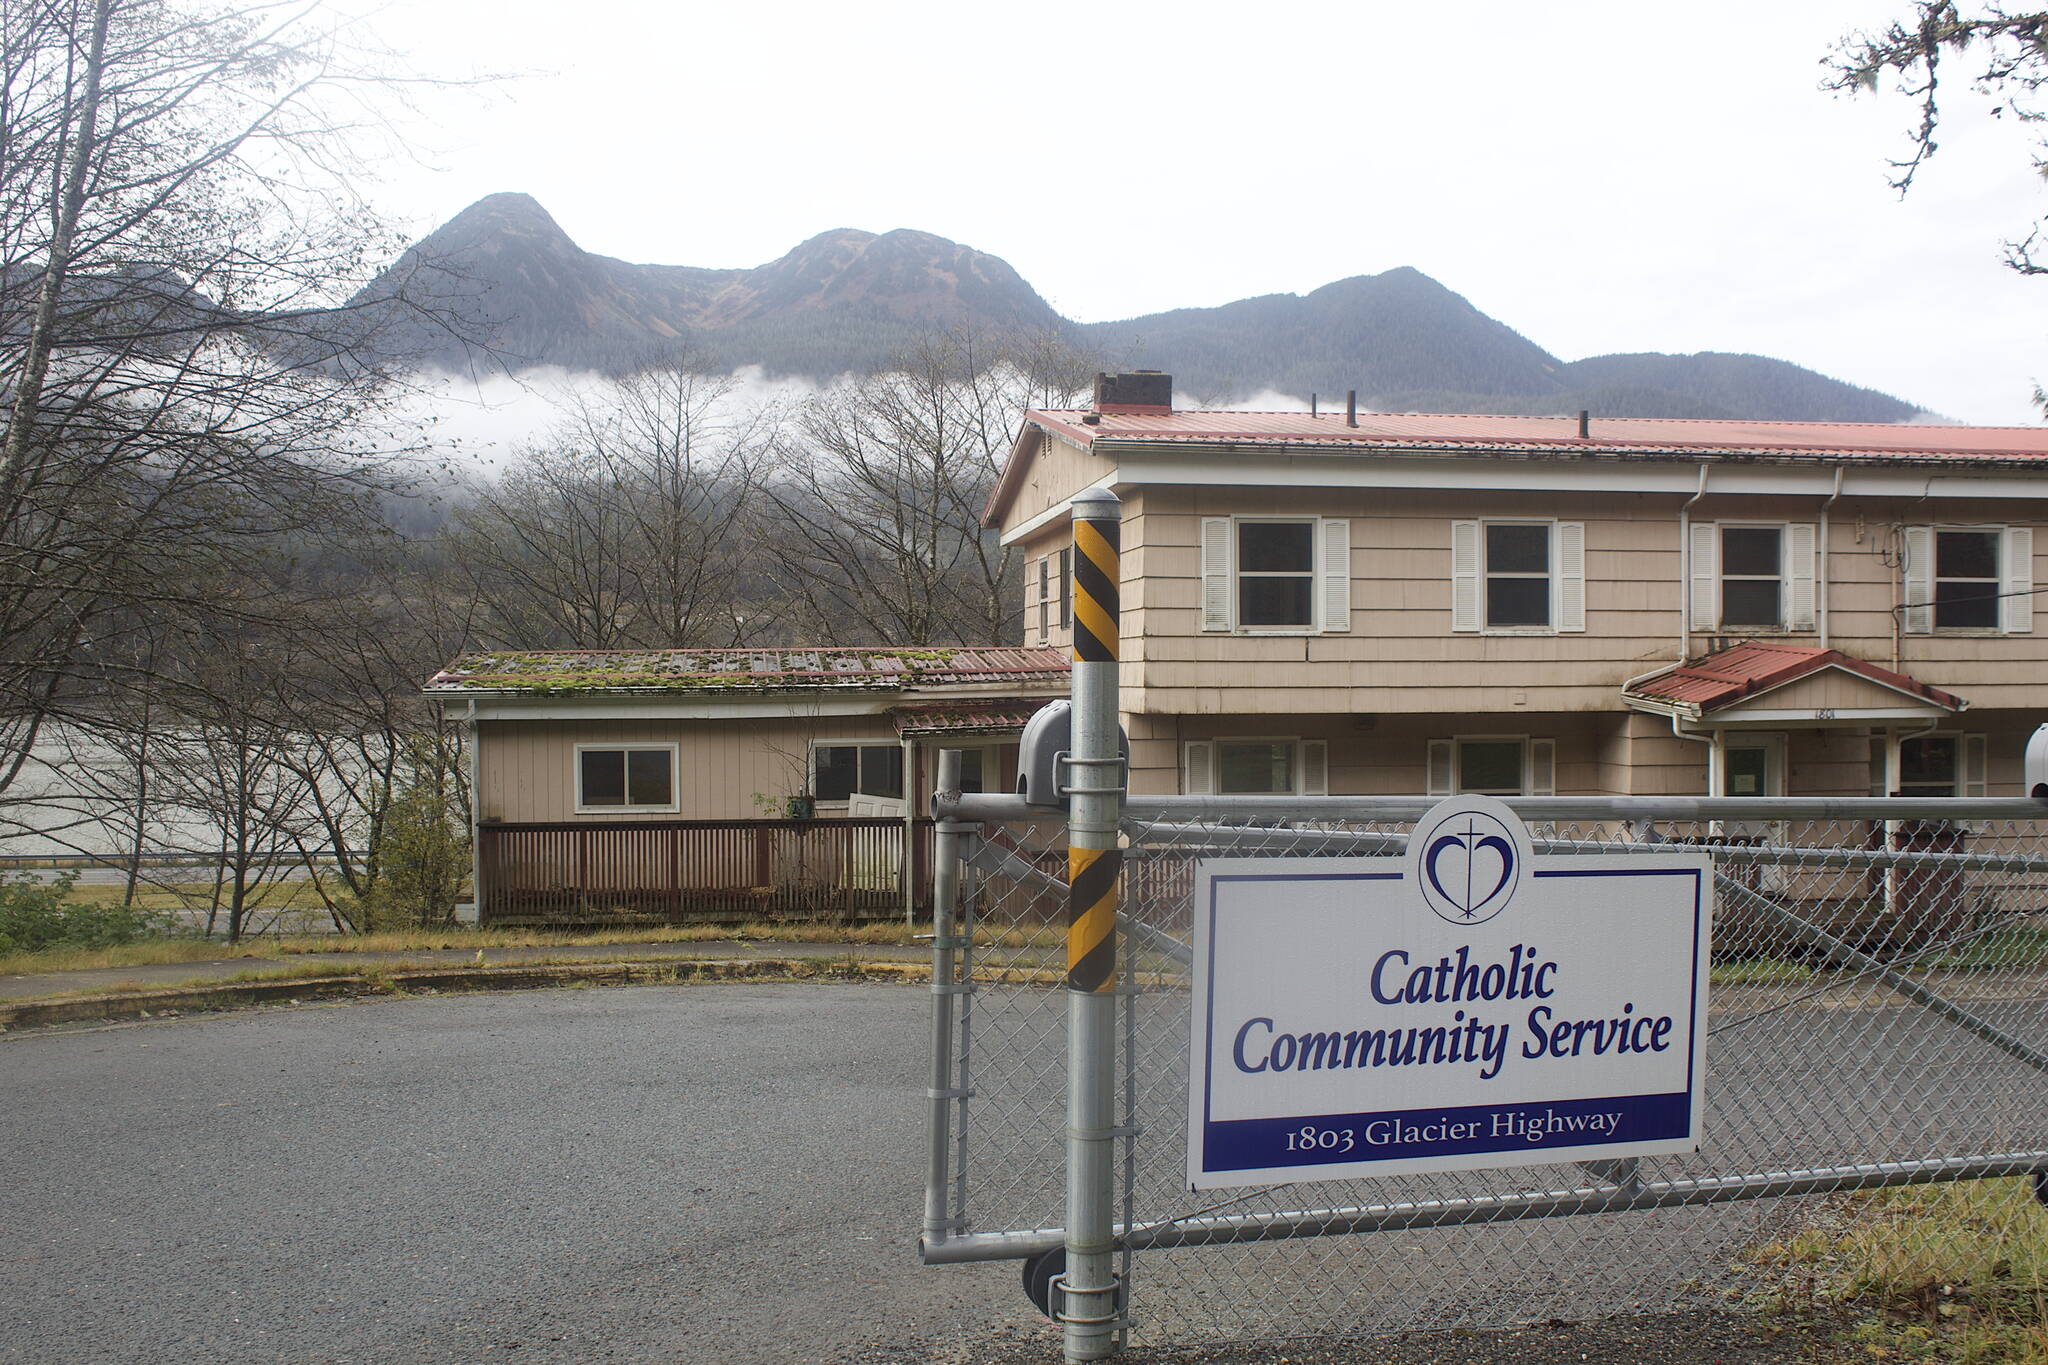 Officials at Catholic Community Service in Juneau, which operated a hospice and home care program for 20 years before discharging all patients as of Oct. 19, are now working with Bartlett Regional Hospital administrators and attorneys on a transition plan. Hospital leaders said it may take anywhere from a couple of months to a couple of years before a full hospice and home care program is implemented there. (Mark Sabbatini / Juneau Empire)